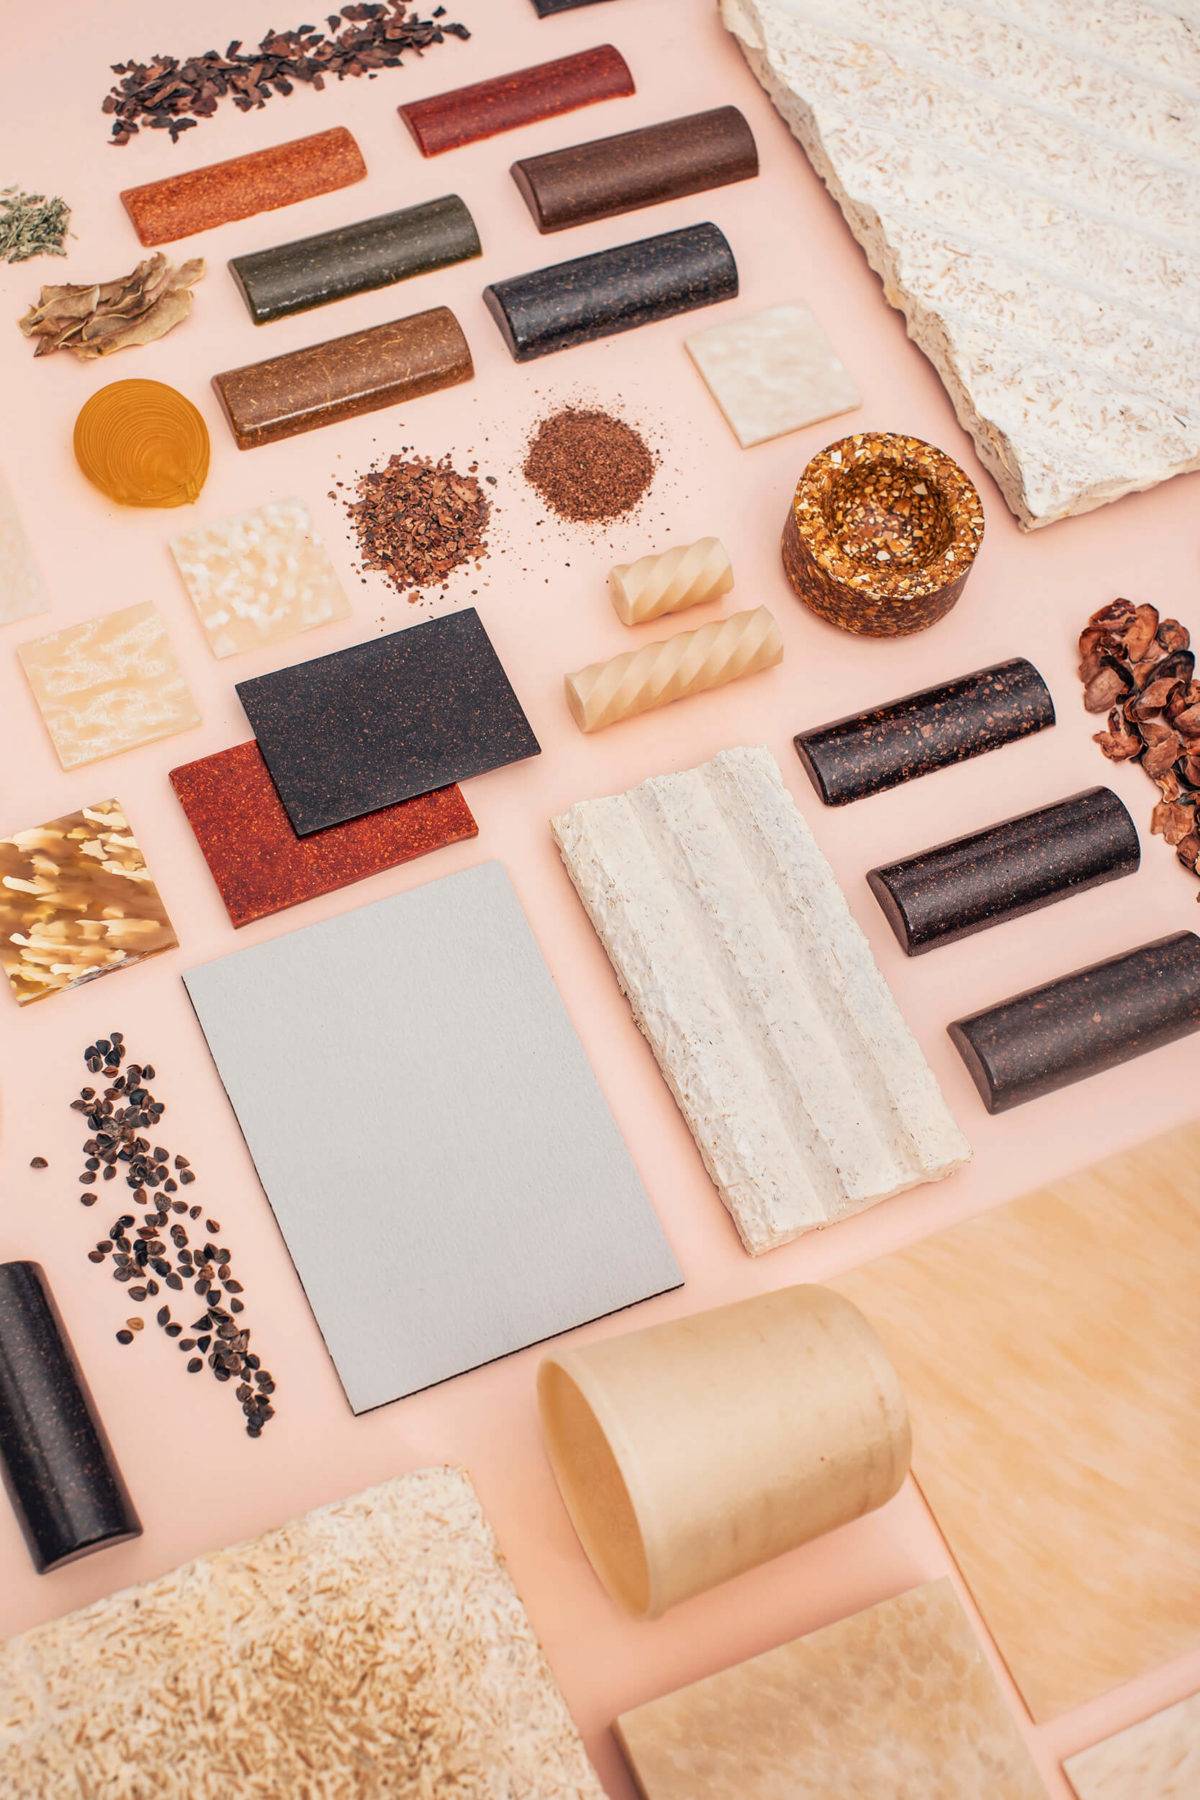 A large selection of natural material samples laid out on a light pink background